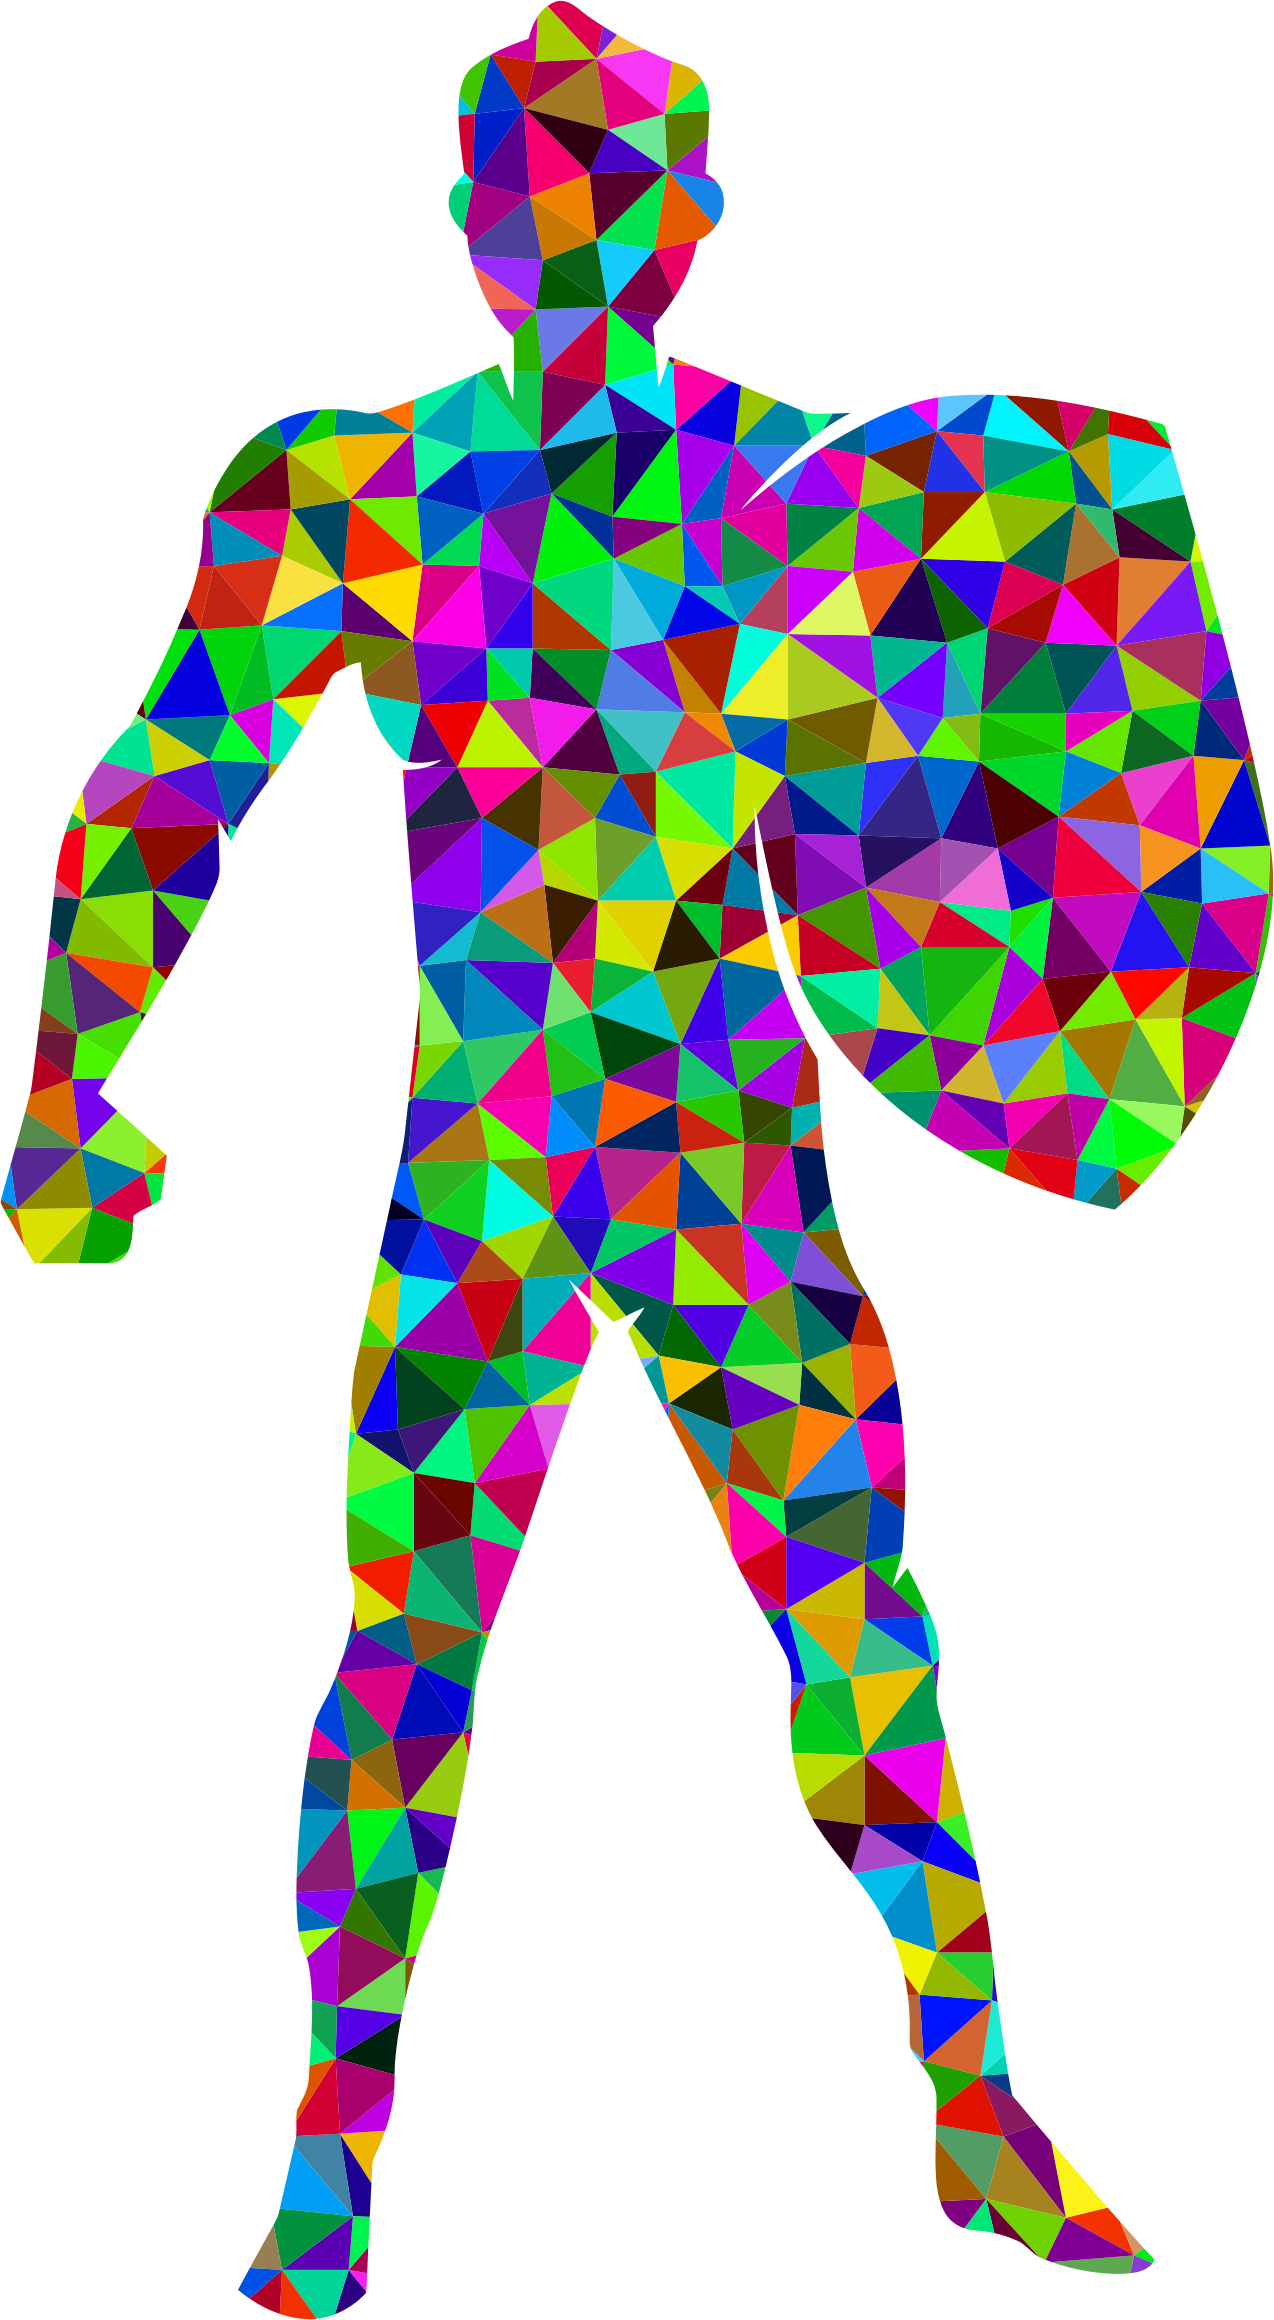 This Free Icons Png Design Of Prismatic Low Poly Man - Zazzle Bunter Drache Ipad Mini Hülle (1274x2320)